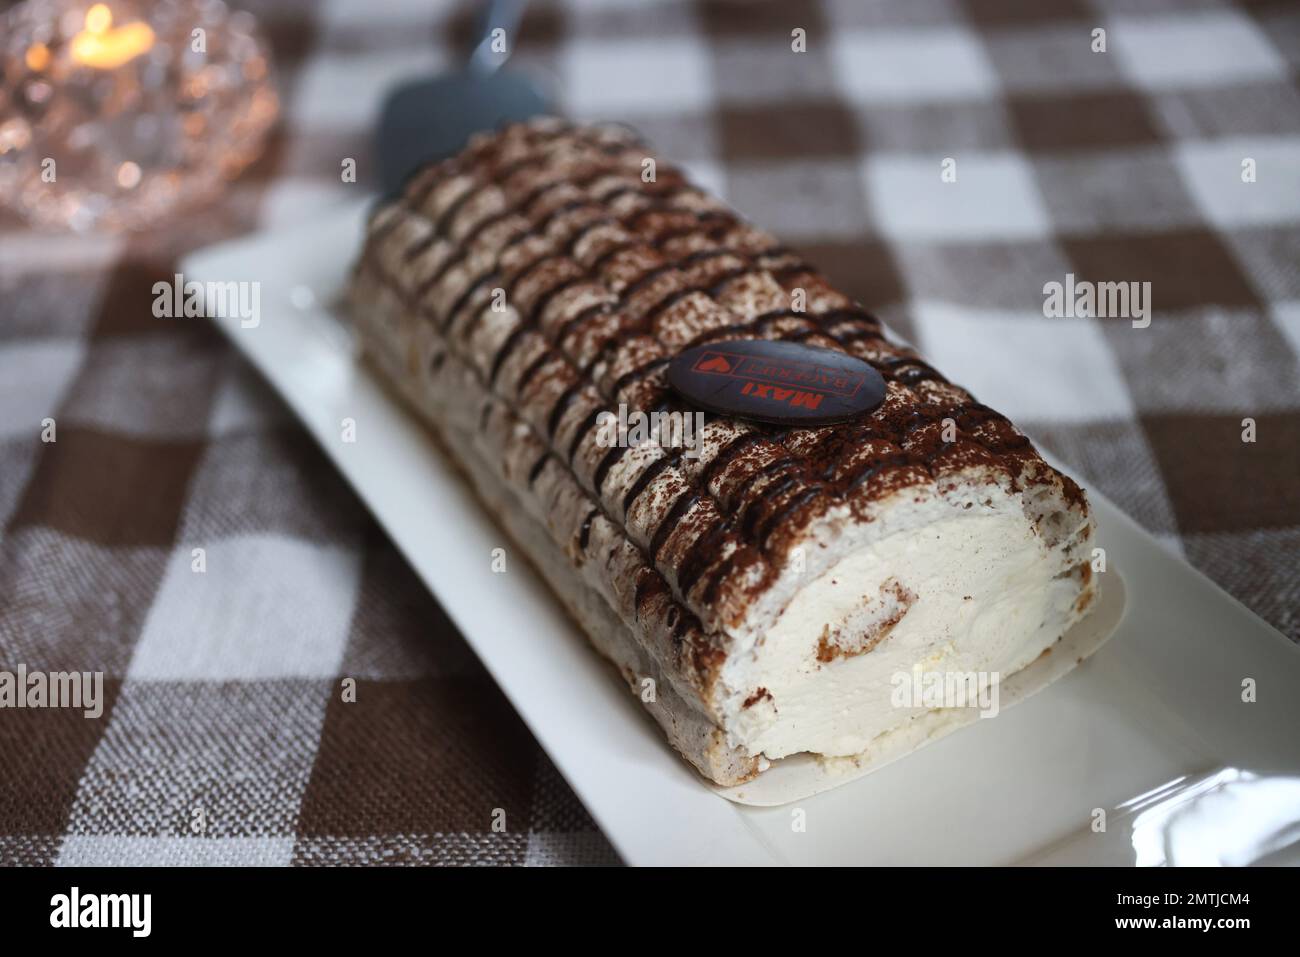 "Budapestbakelse", (In english: Budapest pastry). Stock Photo